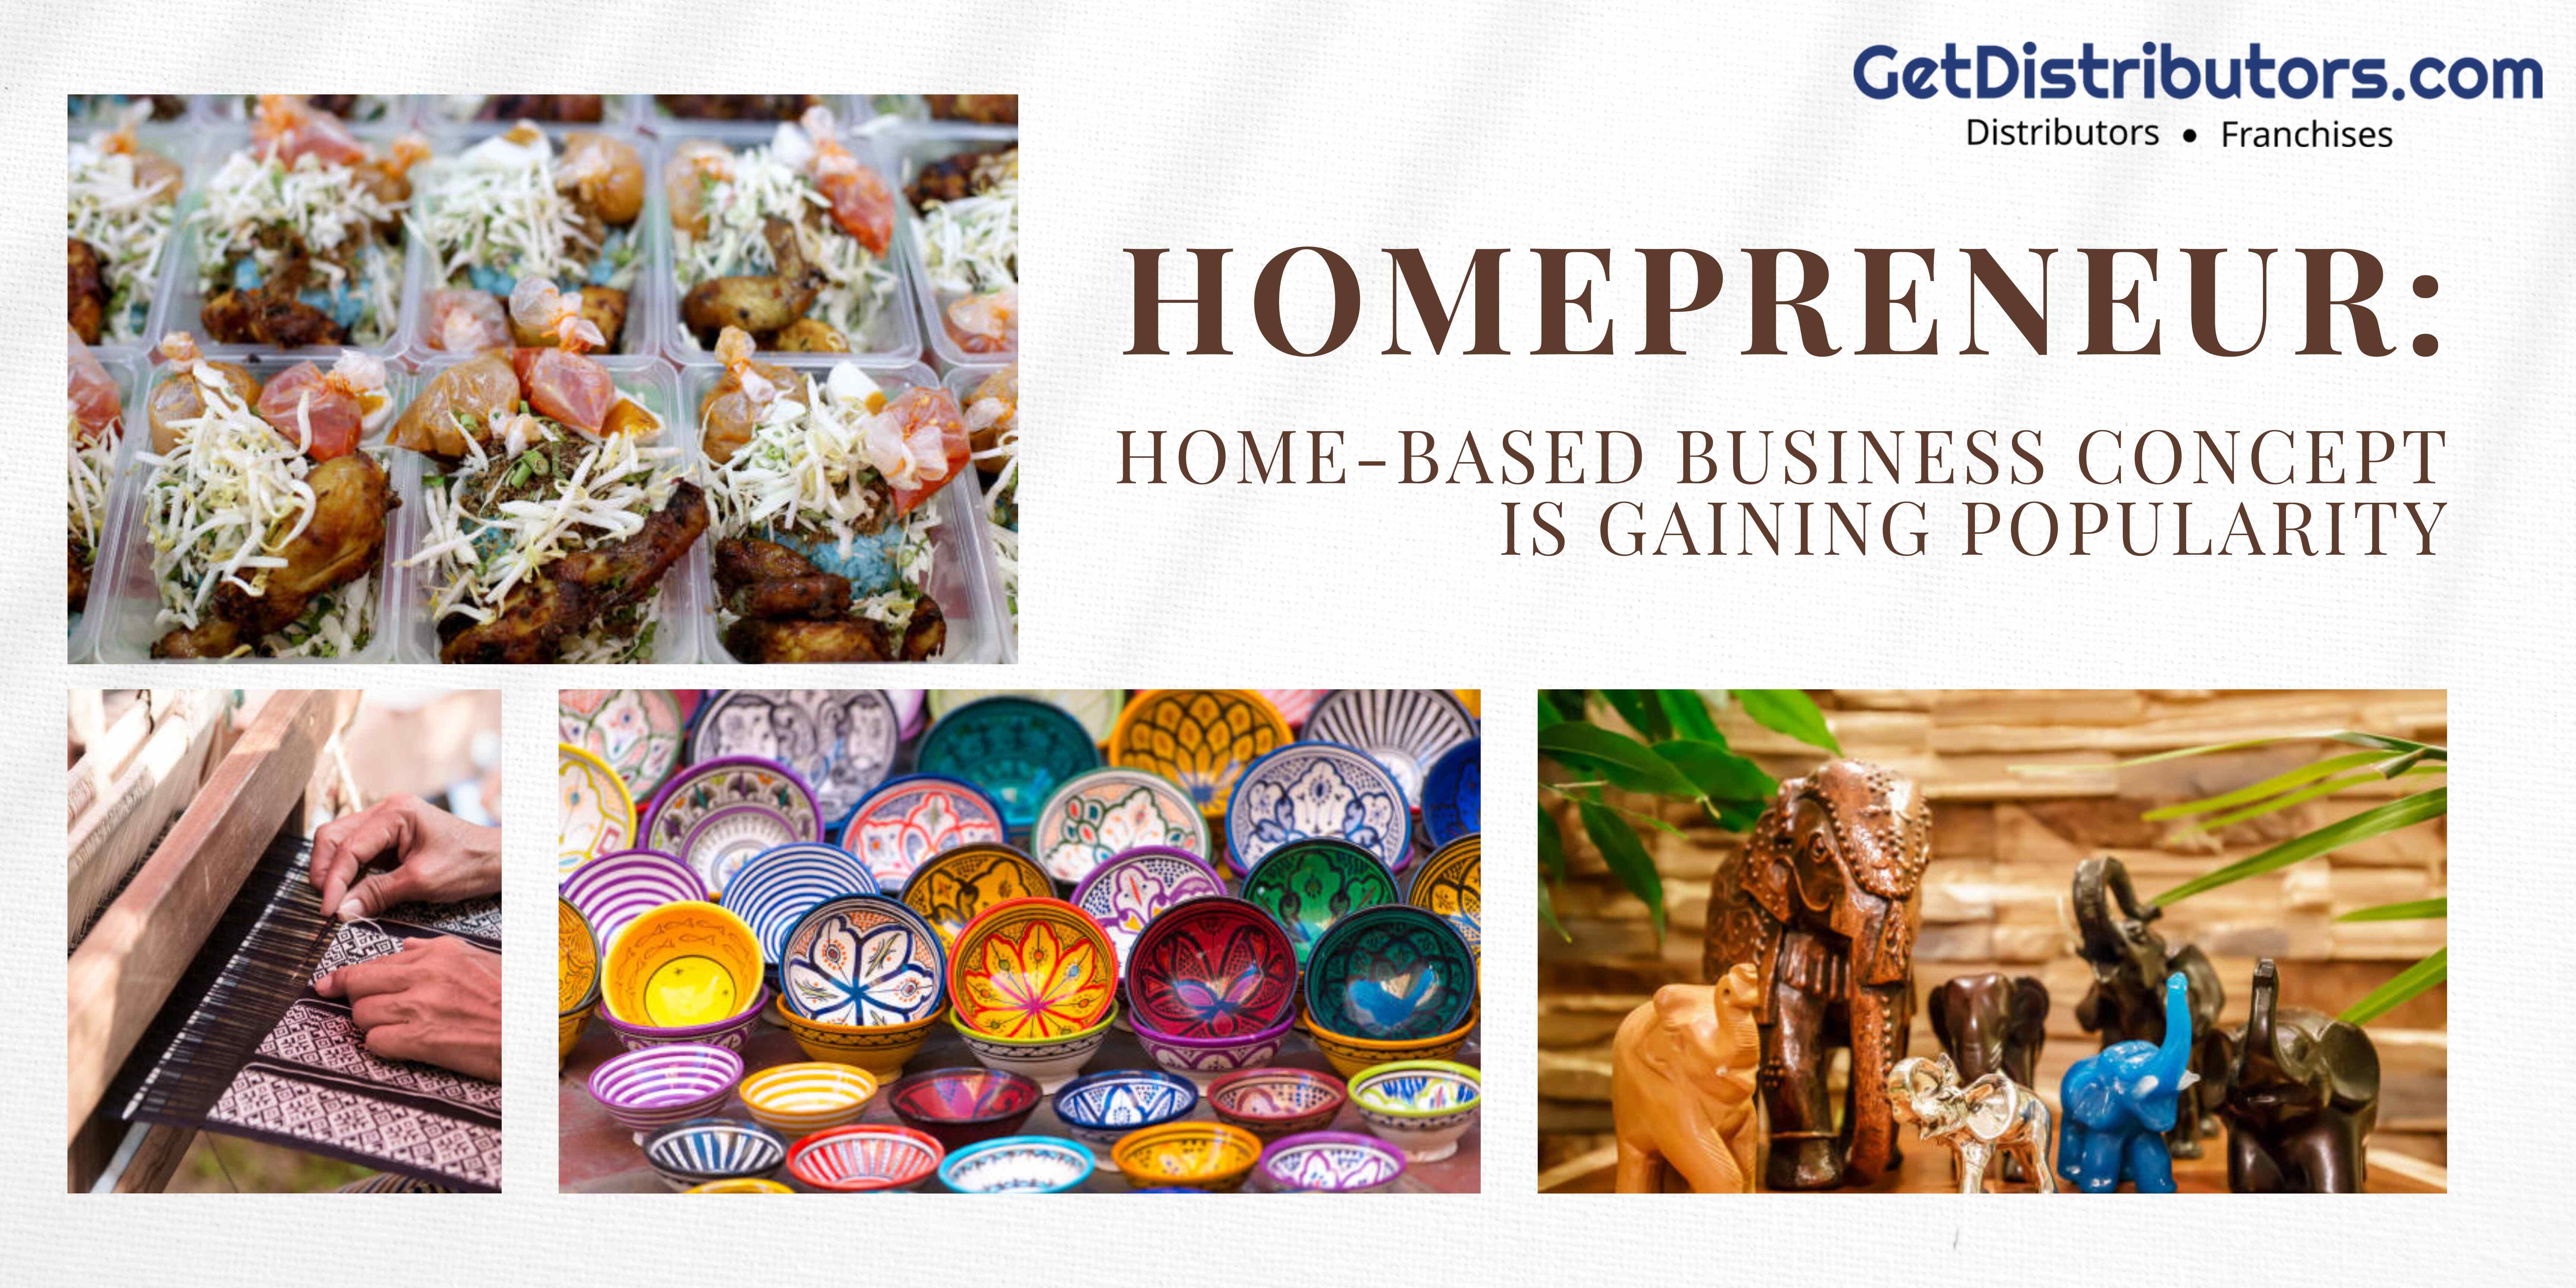 Homepreneur: Home-Based Business Concept is Gaining Popularity